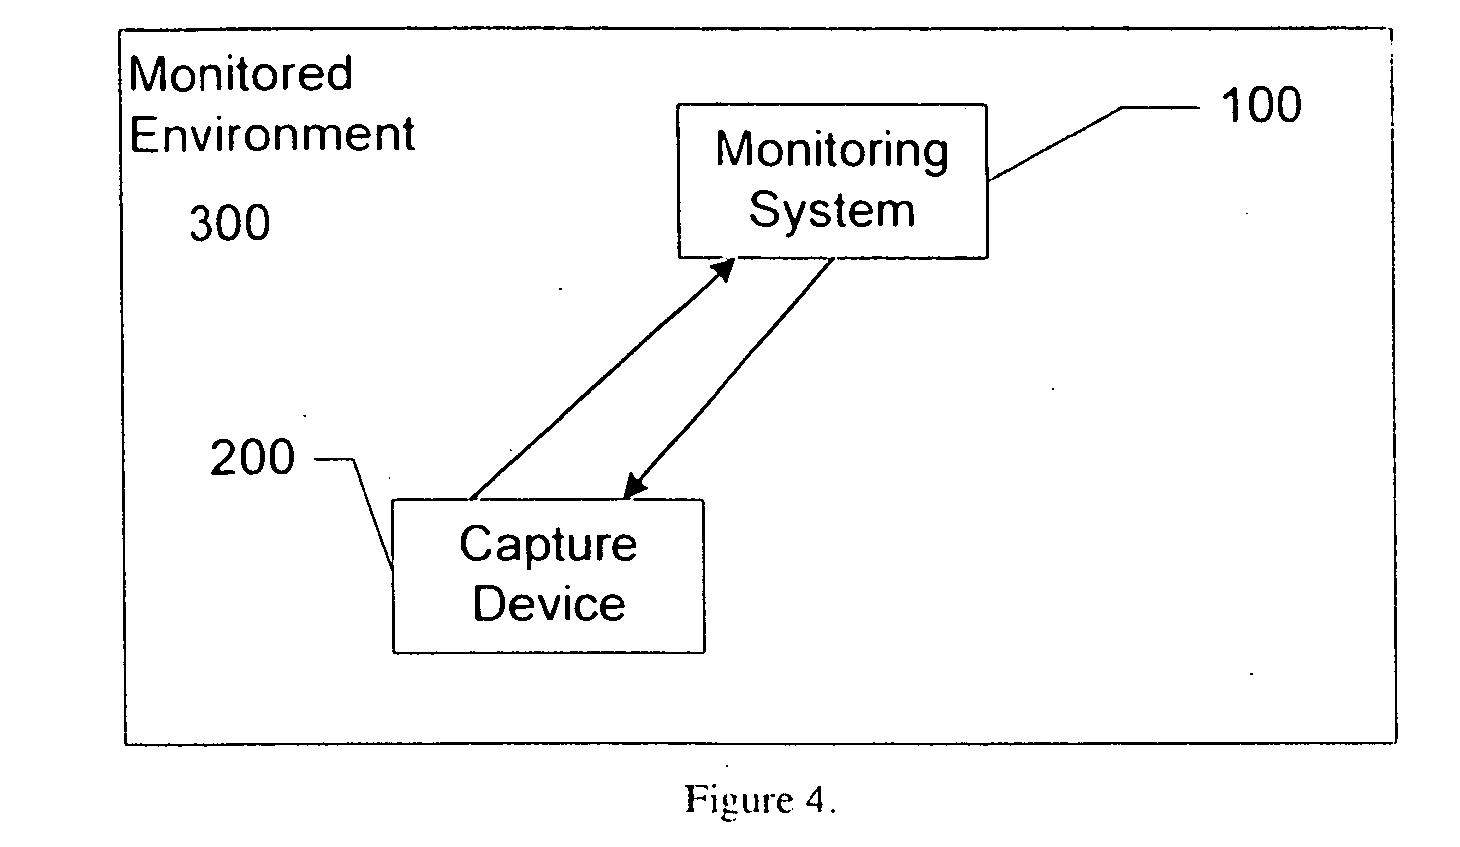 Method and system to announce or prevent voyeur recording in a monitored environment